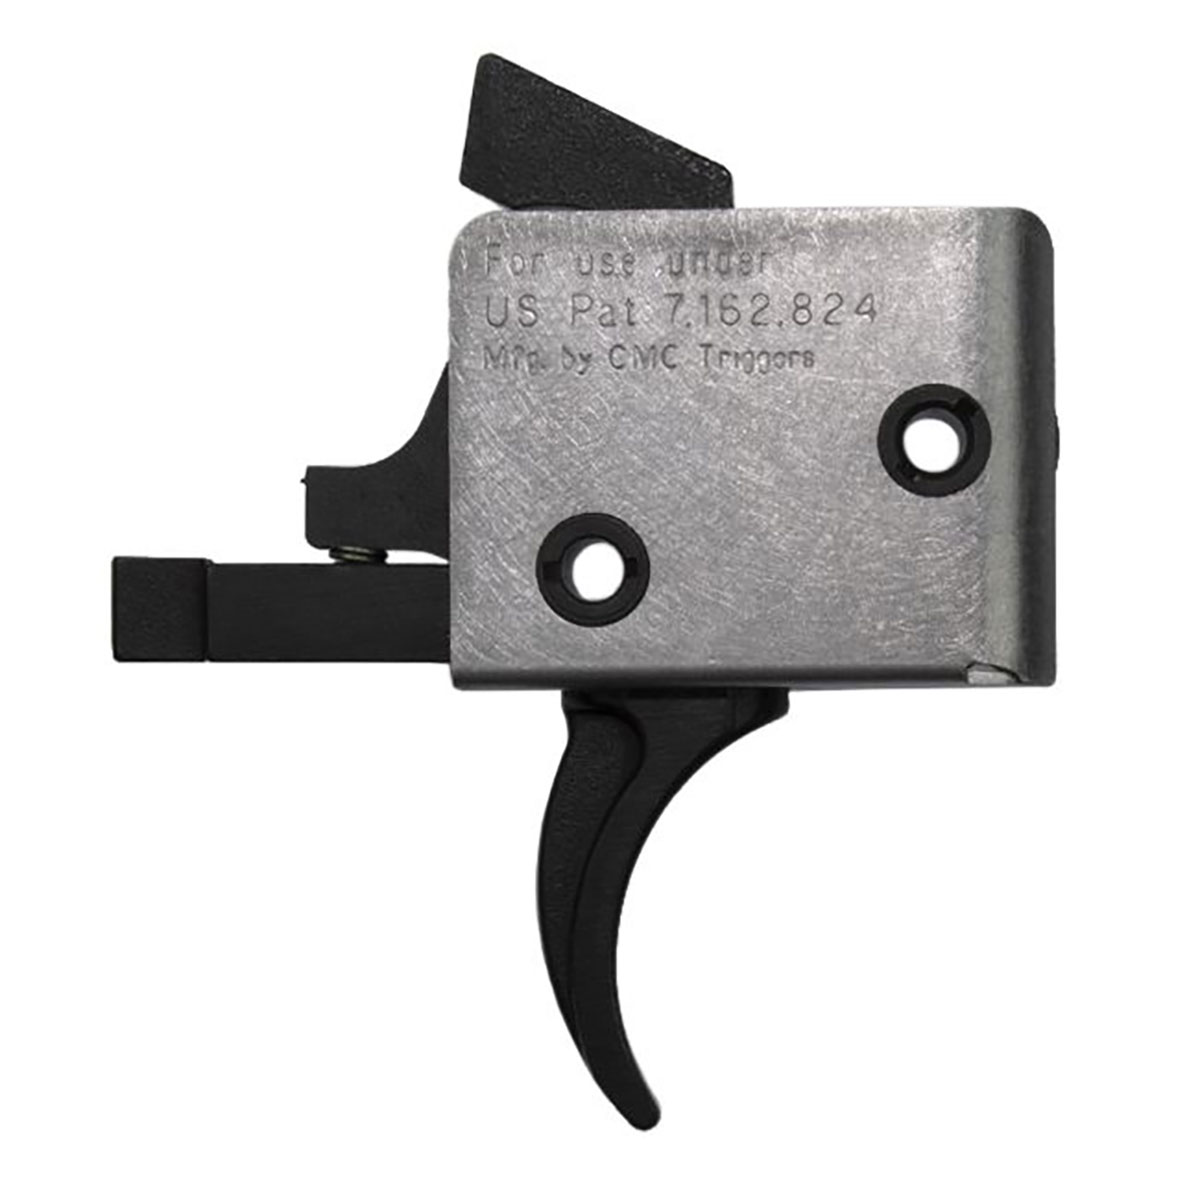 CMC TRIGGERS - AR-15 SINGLE STAGE TRIGGERS LARGE PIN